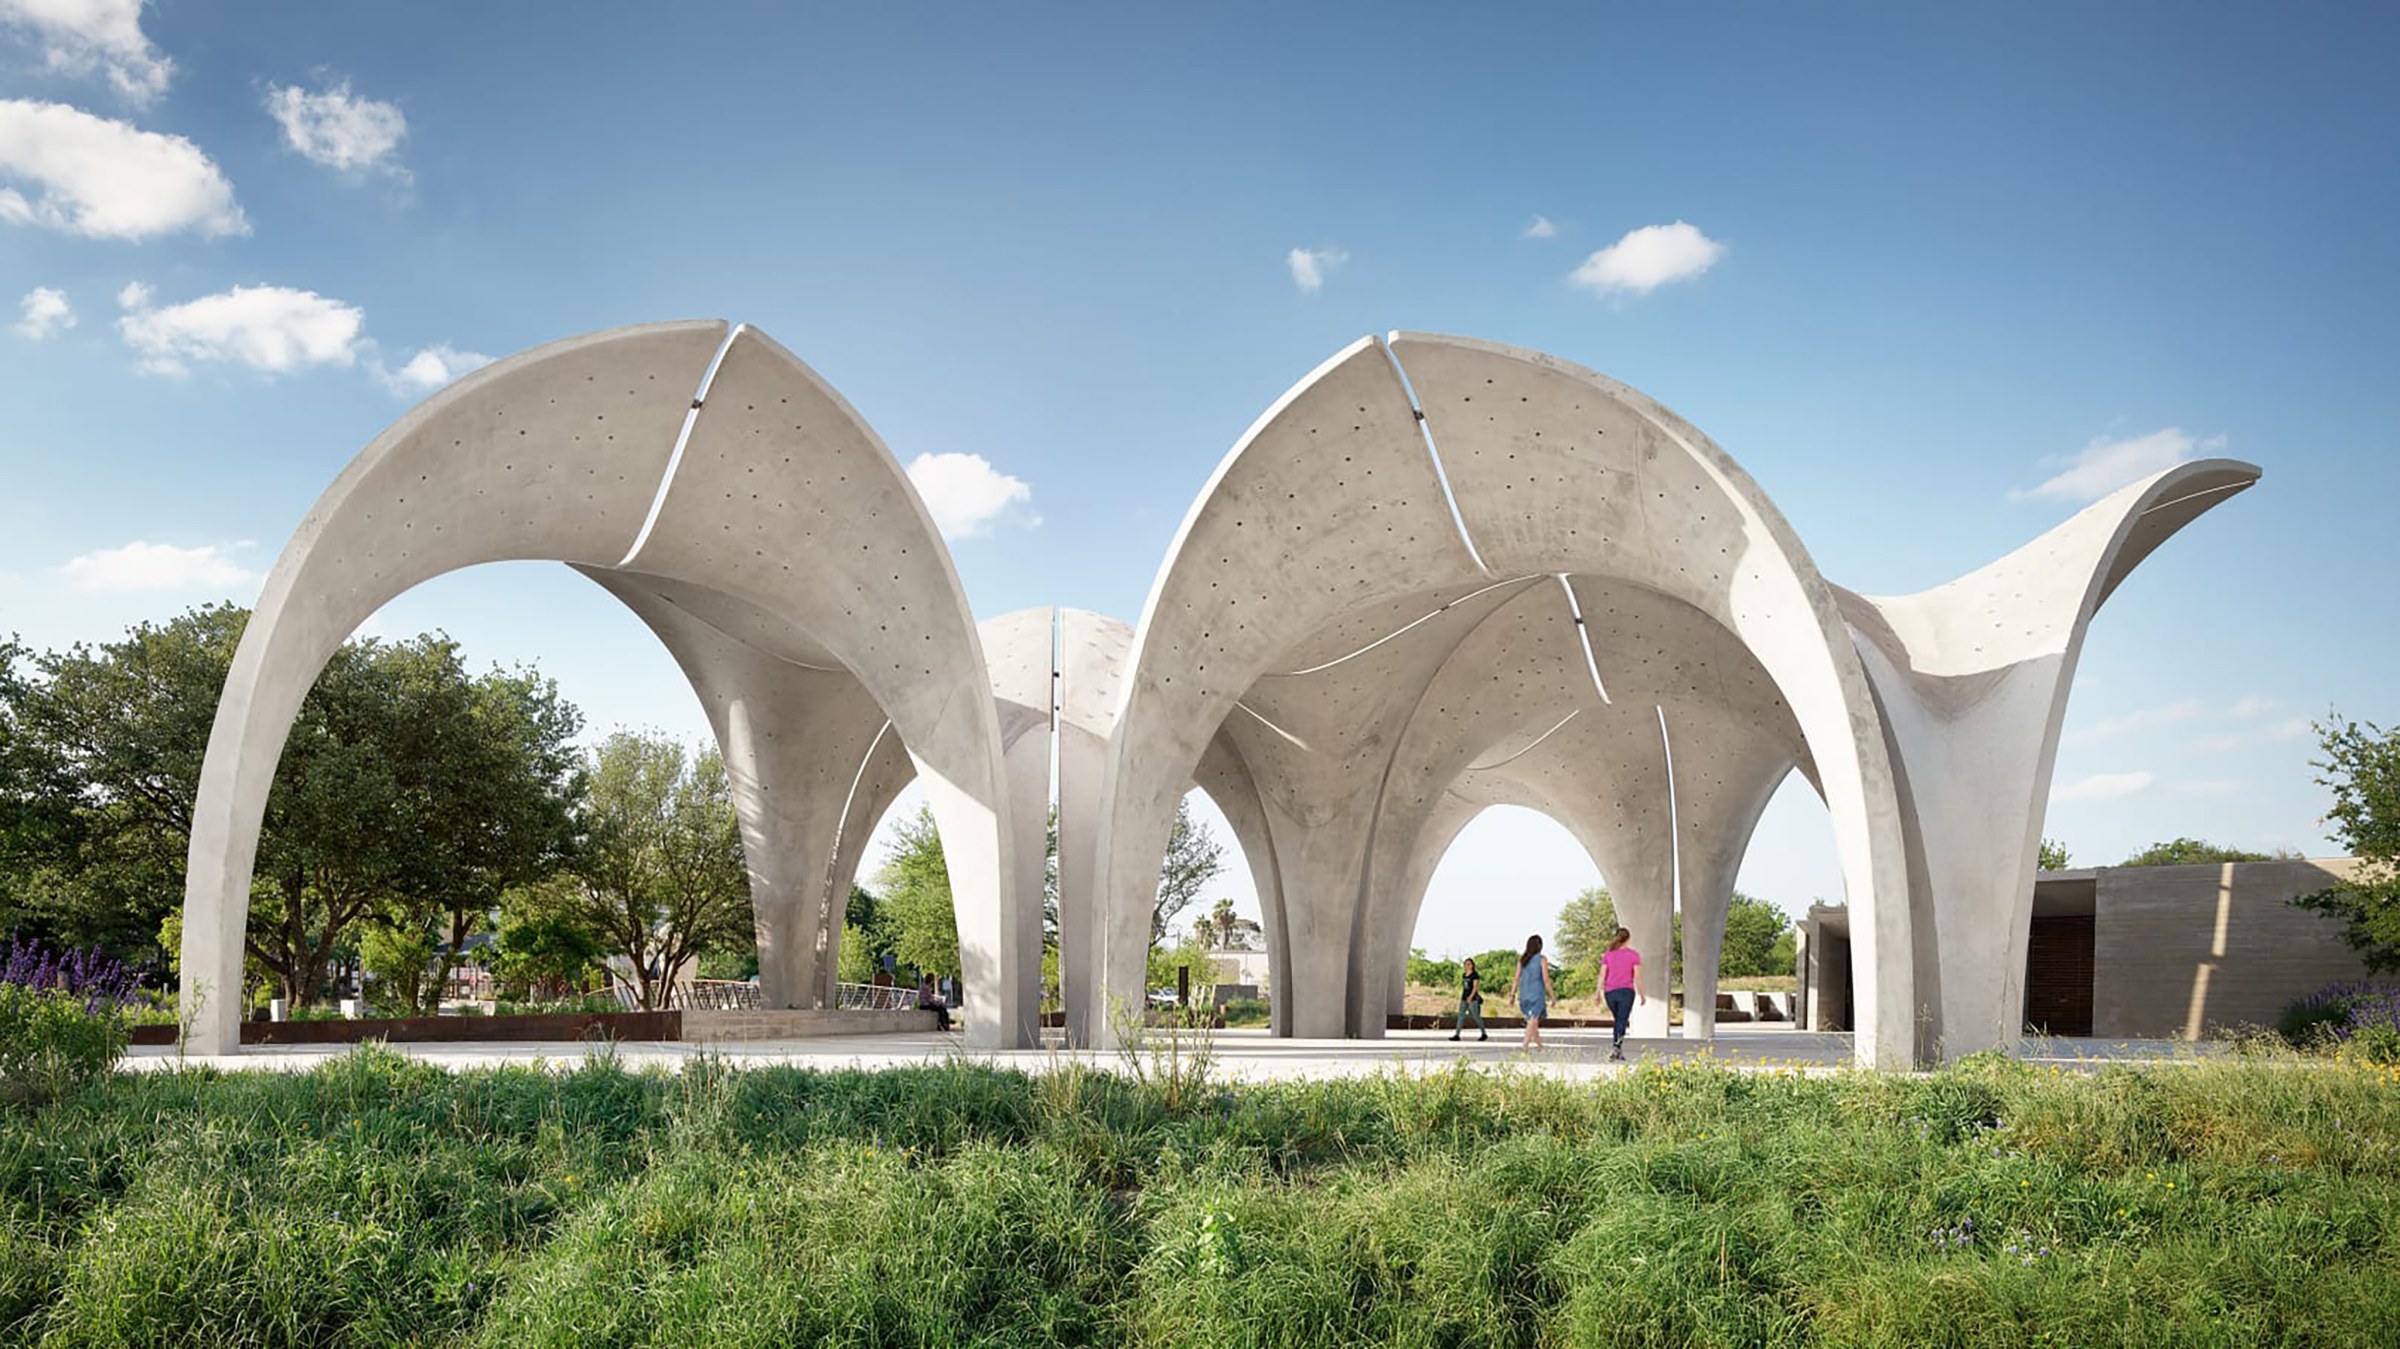 Photo of Confluence park, with greenery in the front of the image and large arches